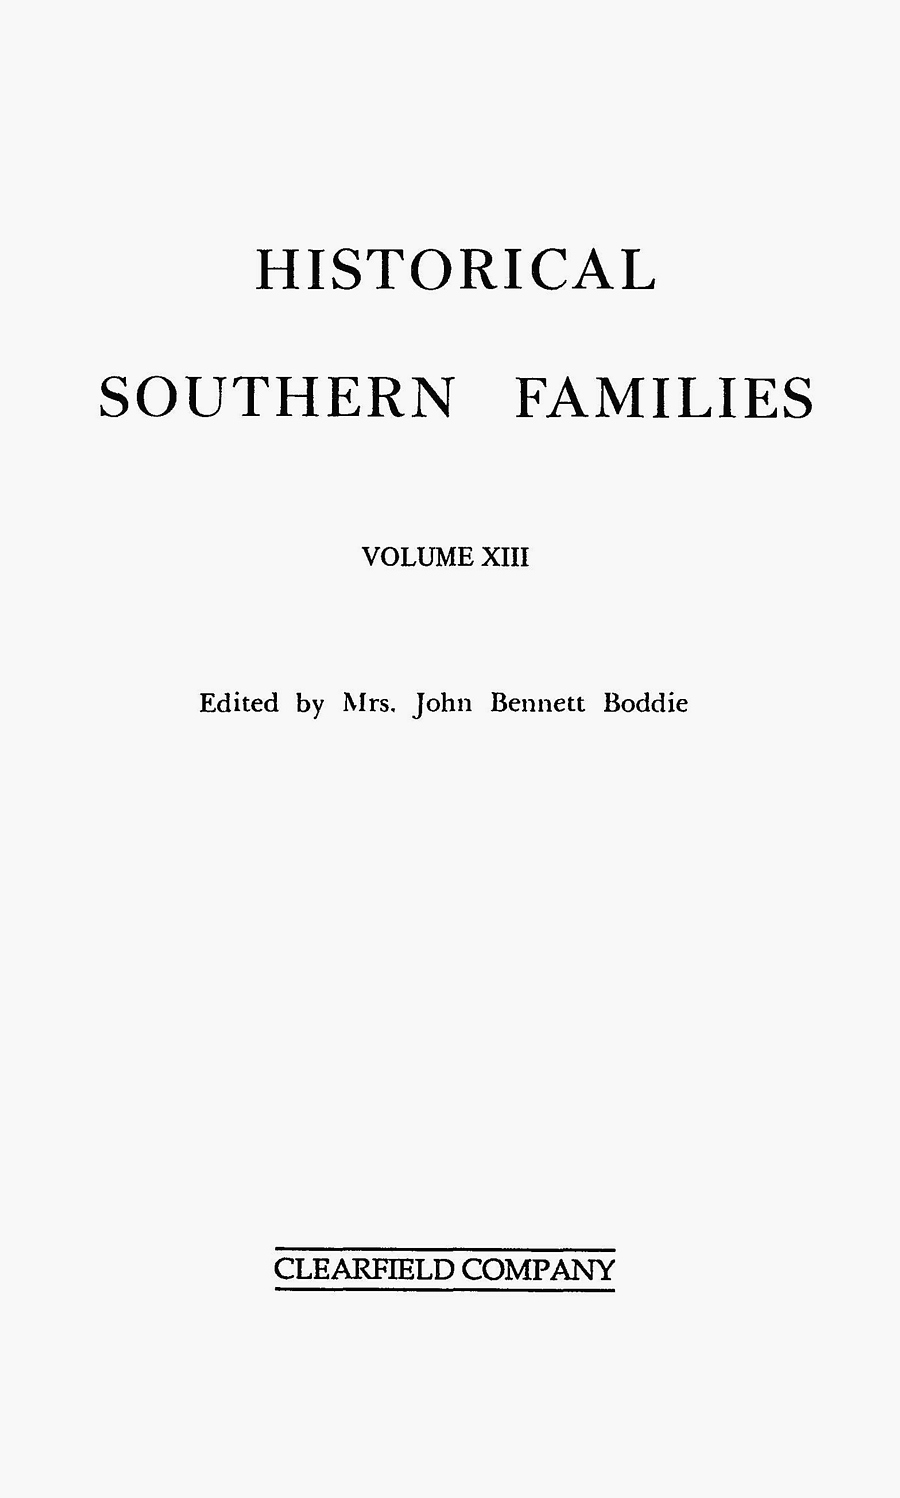 HistoricalSouthernFamilies